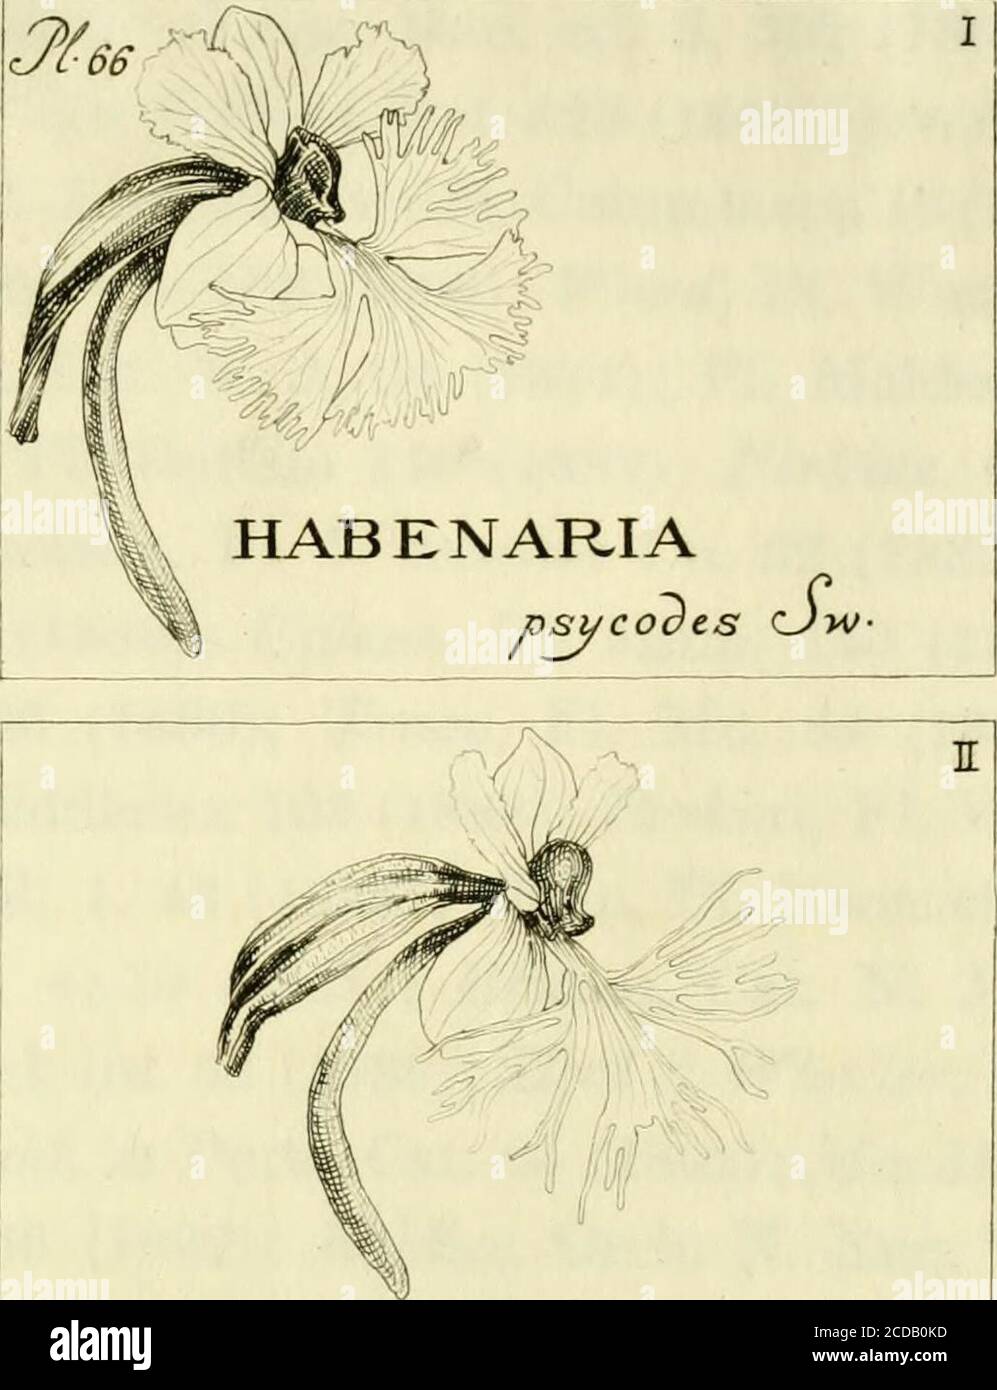 . Orchidaceae: Illustrationen und Studien der Familie Orchidaceae . ly-August, Chapmaji (Biltmore Dist. Nr. 4966 b) (2, 3, 4, 5).See Co.: In der Nähe von Eustis, 16.-25,1894. August, Nash (Nr. 1700) (2, 3,4,10).Orange Co.: Swamps, 19. August 1902, A. Fredholm (Nr. (3) (5497). ALABAMA, Winston County1866, T. M. Peters (16). Tuscaloosa Co.: Tuscaloosa, Dr. E. A. Smith (12).Butler Co.: Swamps, Greenville, August 11,1900 (Biltmore Nr. 4966d) (5).Mobile Co.: Mobile, C. Mohr (12). – Biloxi, 6. September 1900, F. E.Lloyd SF S. M. Tracy (Nr. (1) (315). MISSISSIPPI, Jackson County Ocean Springs, 30. August 1889, Stockfoto